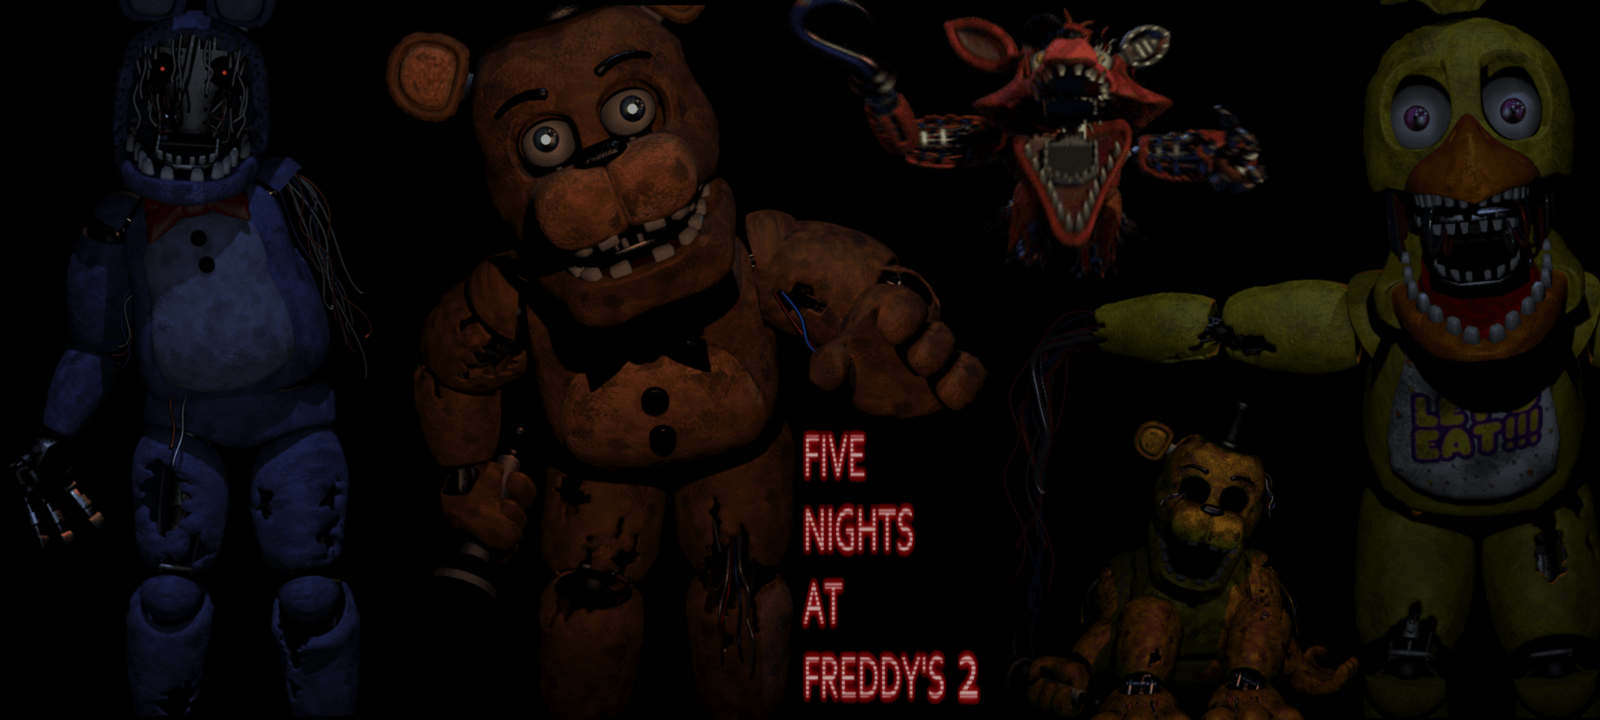 Five Nights At Freddy&;s 2 Wallpaper By Elsa Shadow